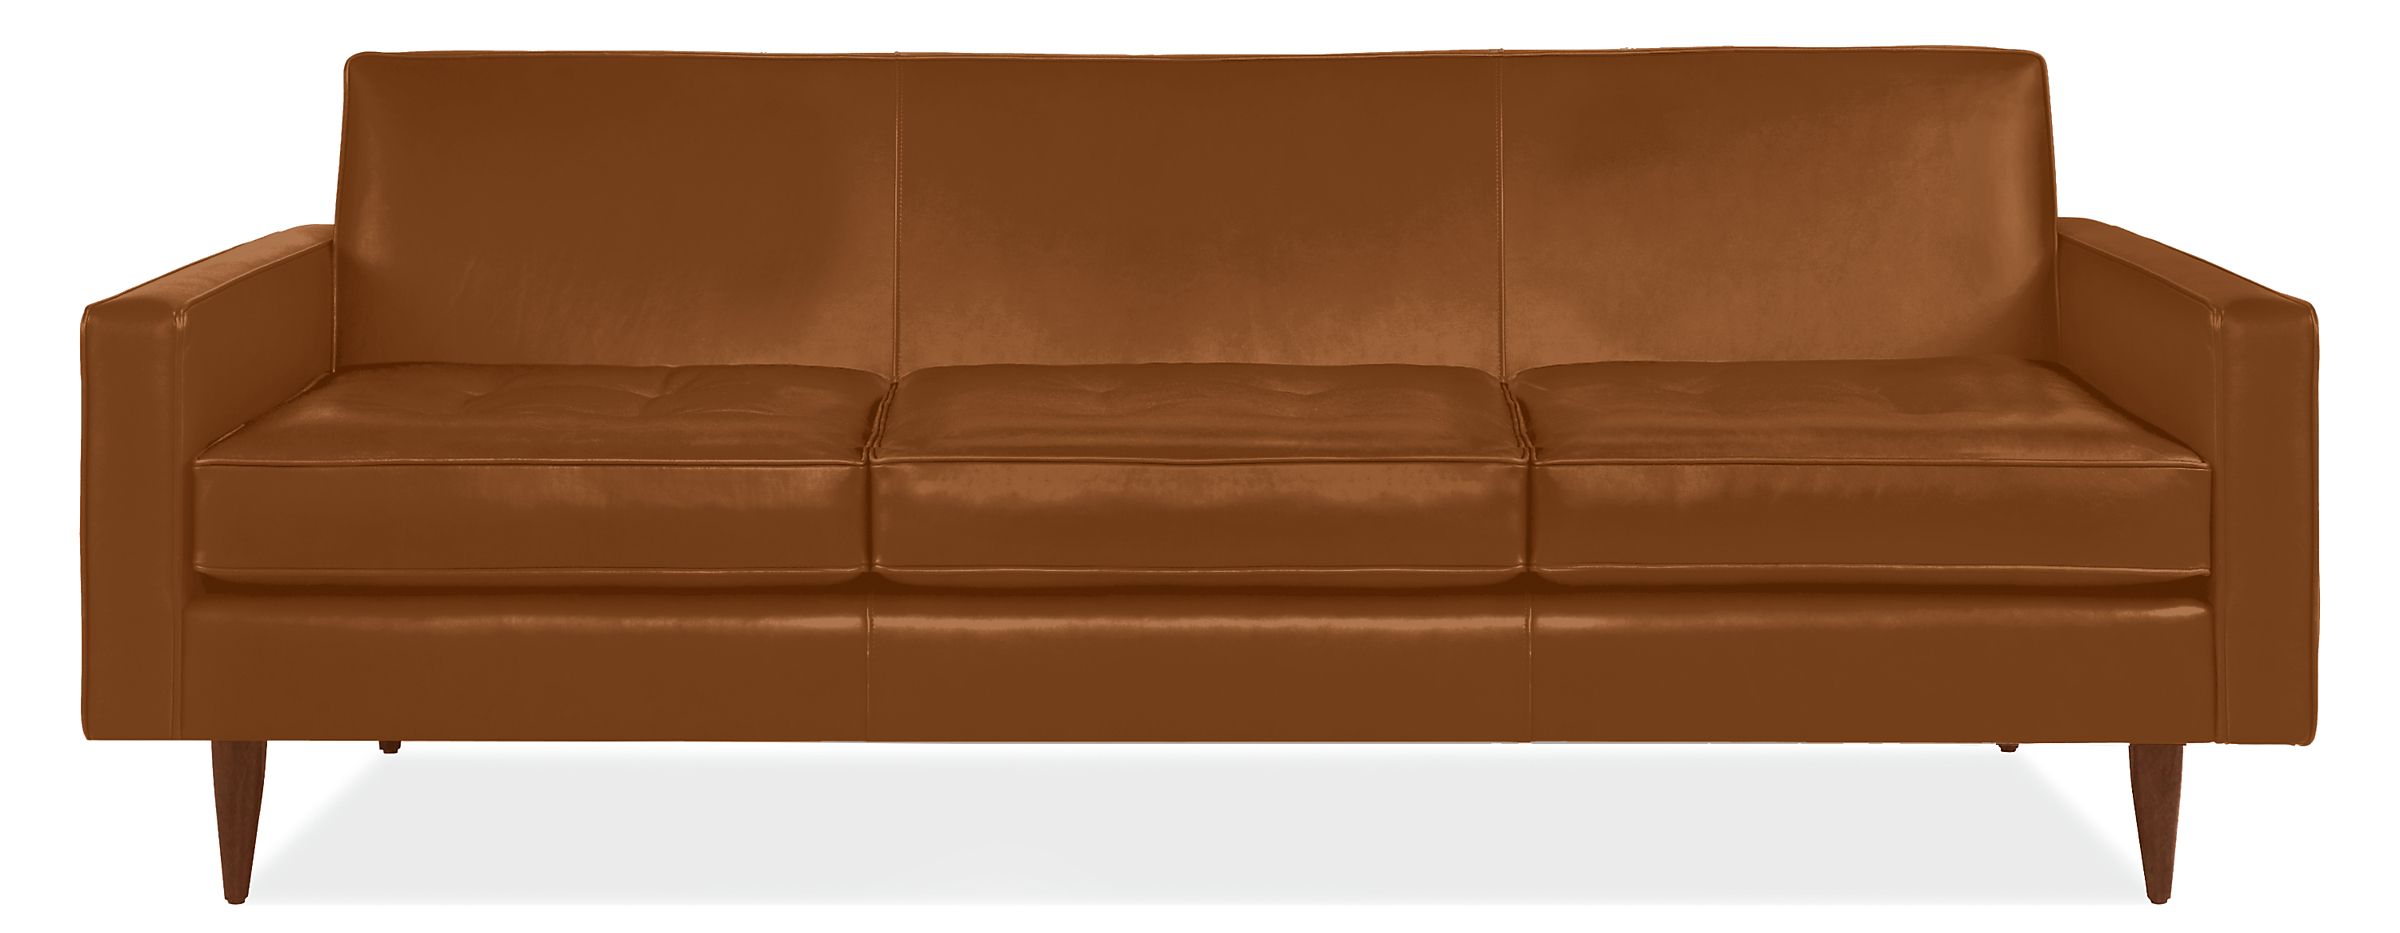 Reese Leather Sofas